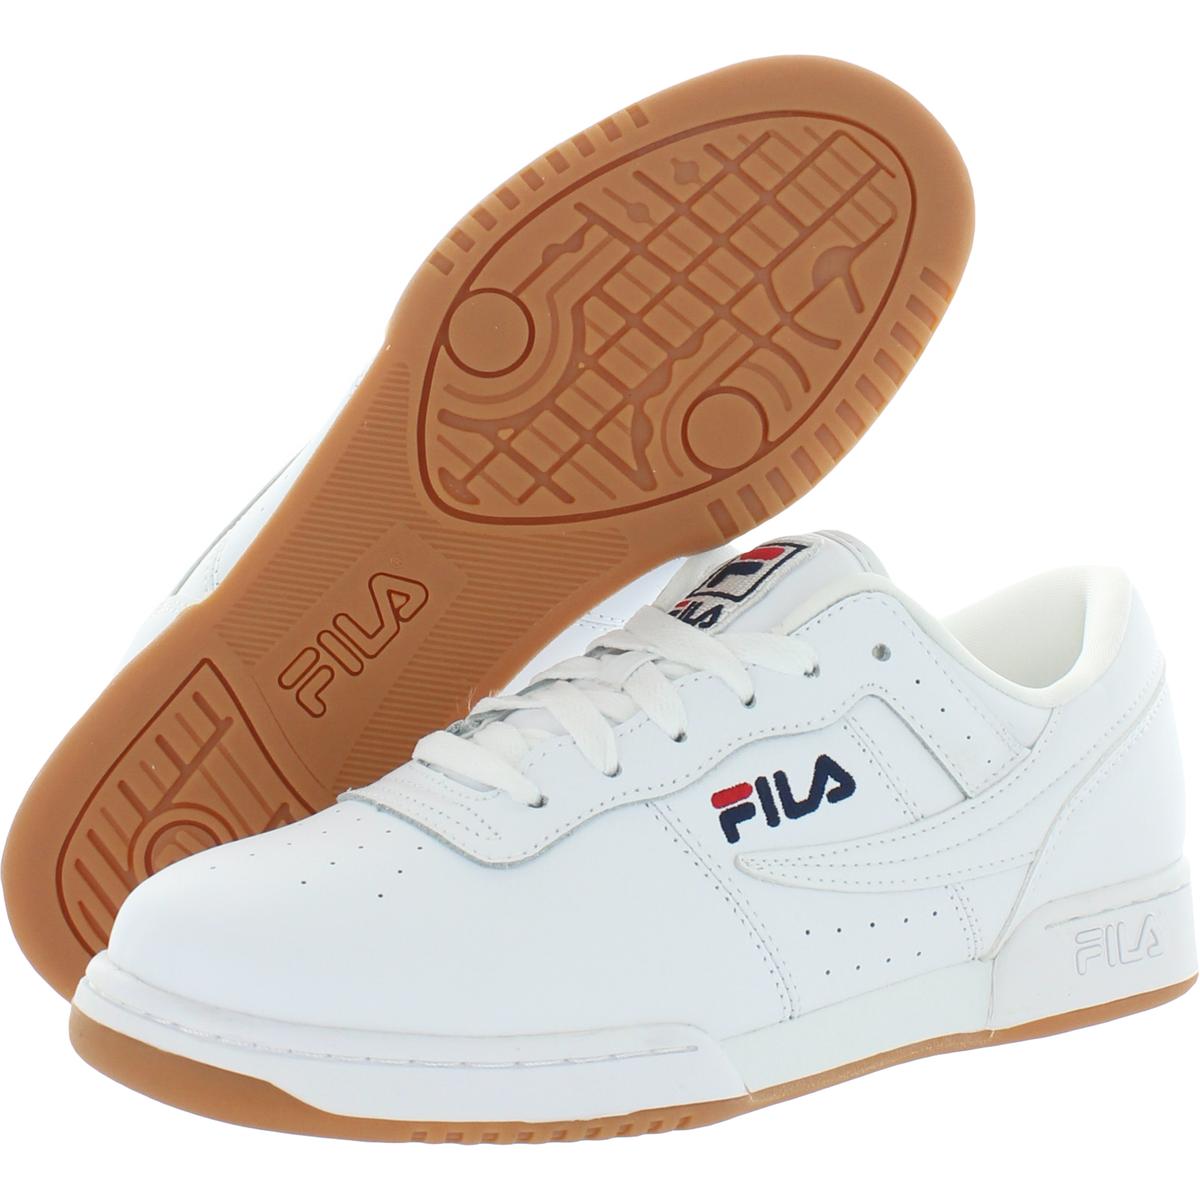 Fila Mens Original Fitness Leather Running Trainers Sneakers Athletic BHFO 2323 | eBay